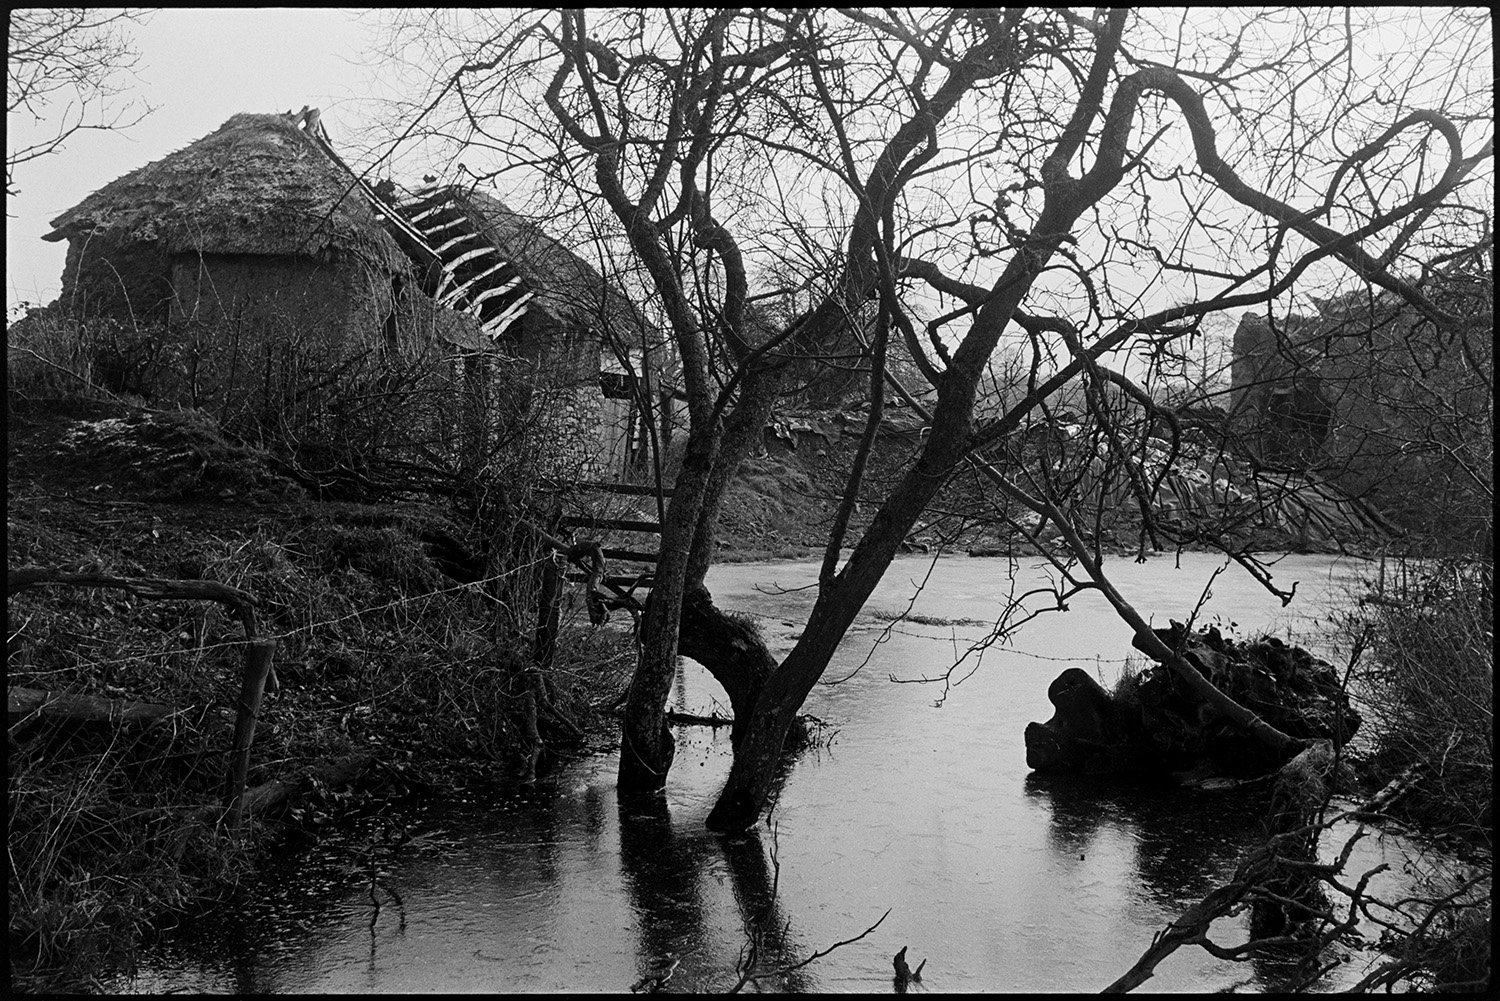 Ruined cob and thatch barns, flooded stream. 
[Trees in a flooded stream by collapsing cob and thatch barns at Middle Week, Iddesleigh. The roof timbers of the barn are visible.]